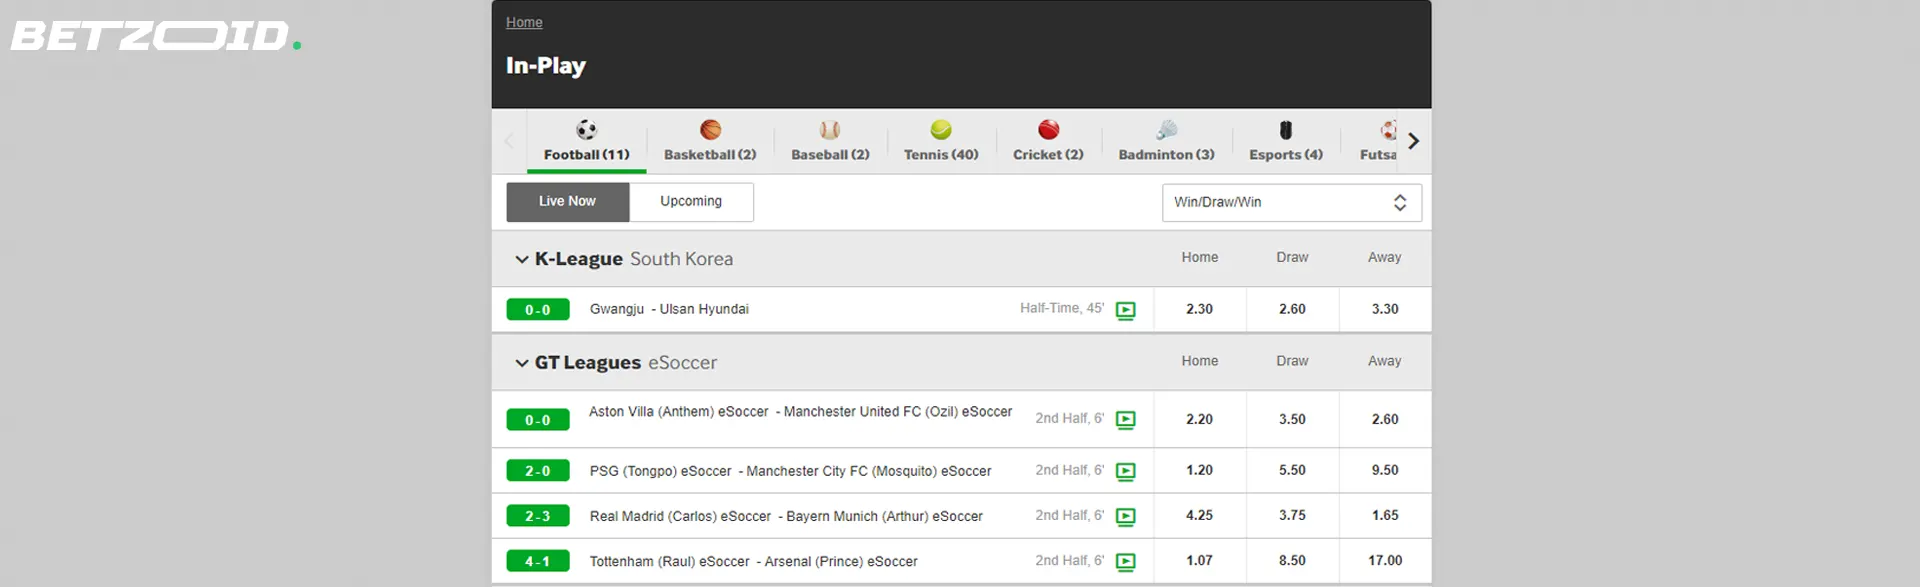 The live betting Betway page with sports events.